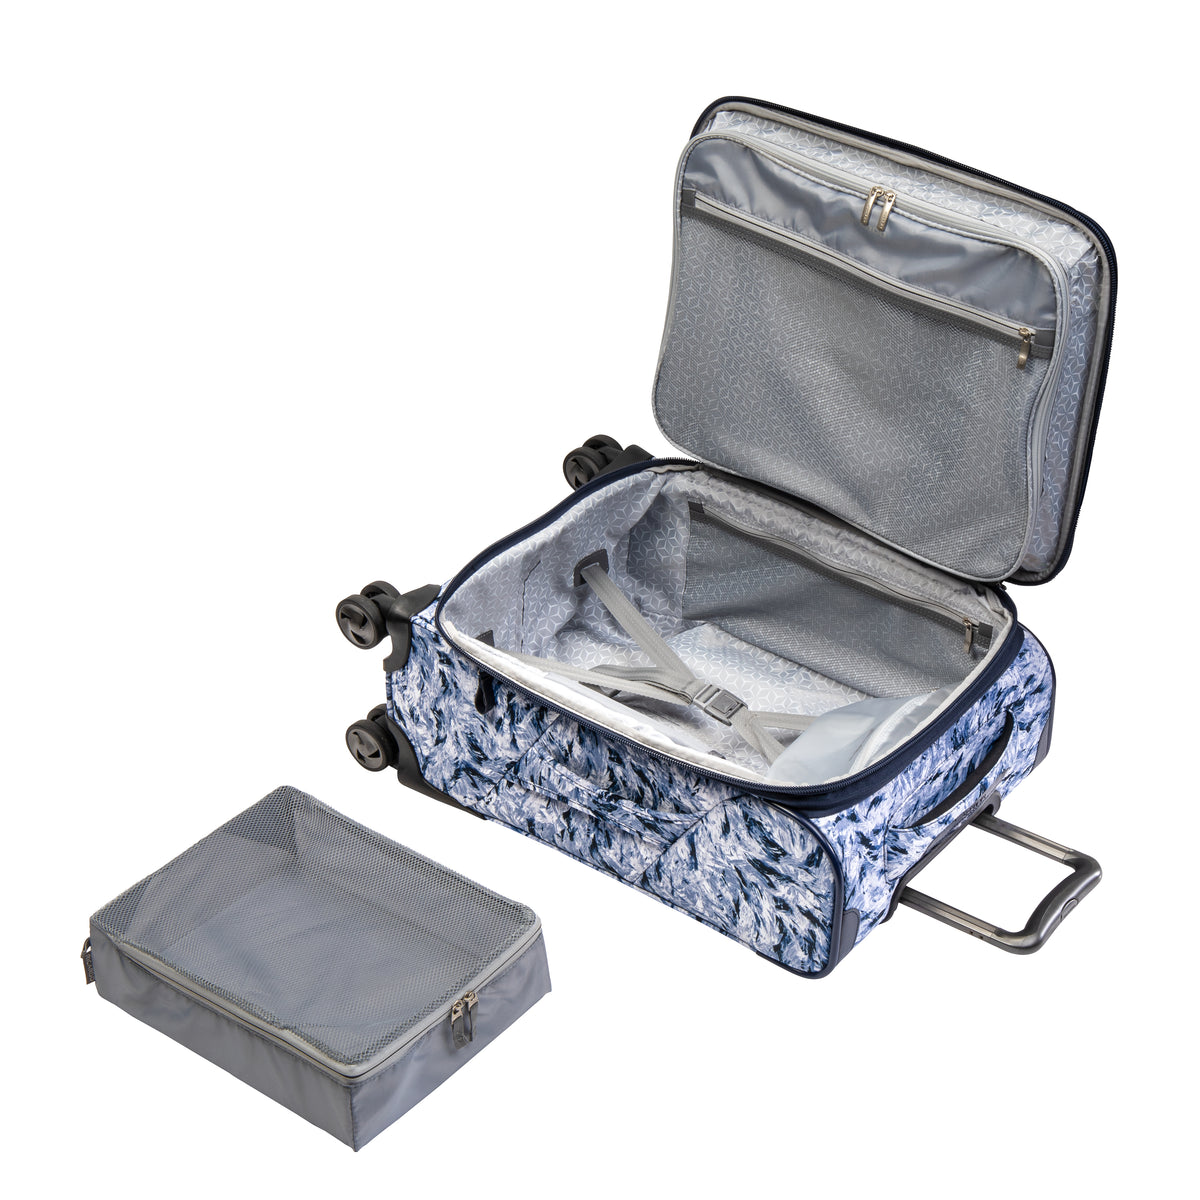 Seahaven 2.0 Softside Carry-On Expandable Spinner